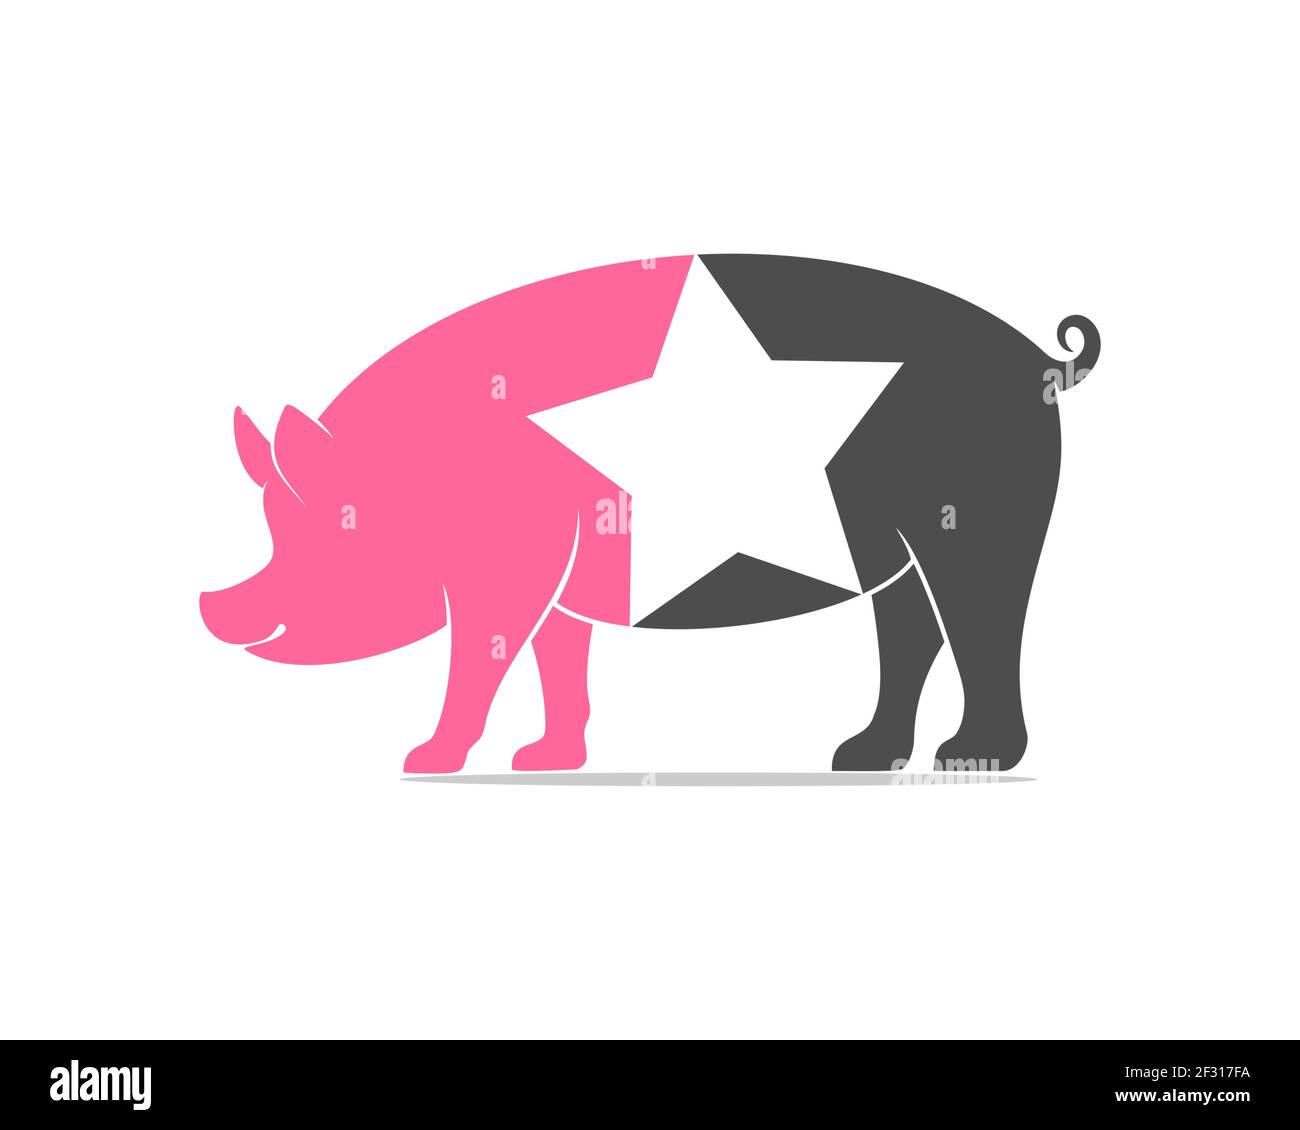 Fat pig with star inside Stock Photo